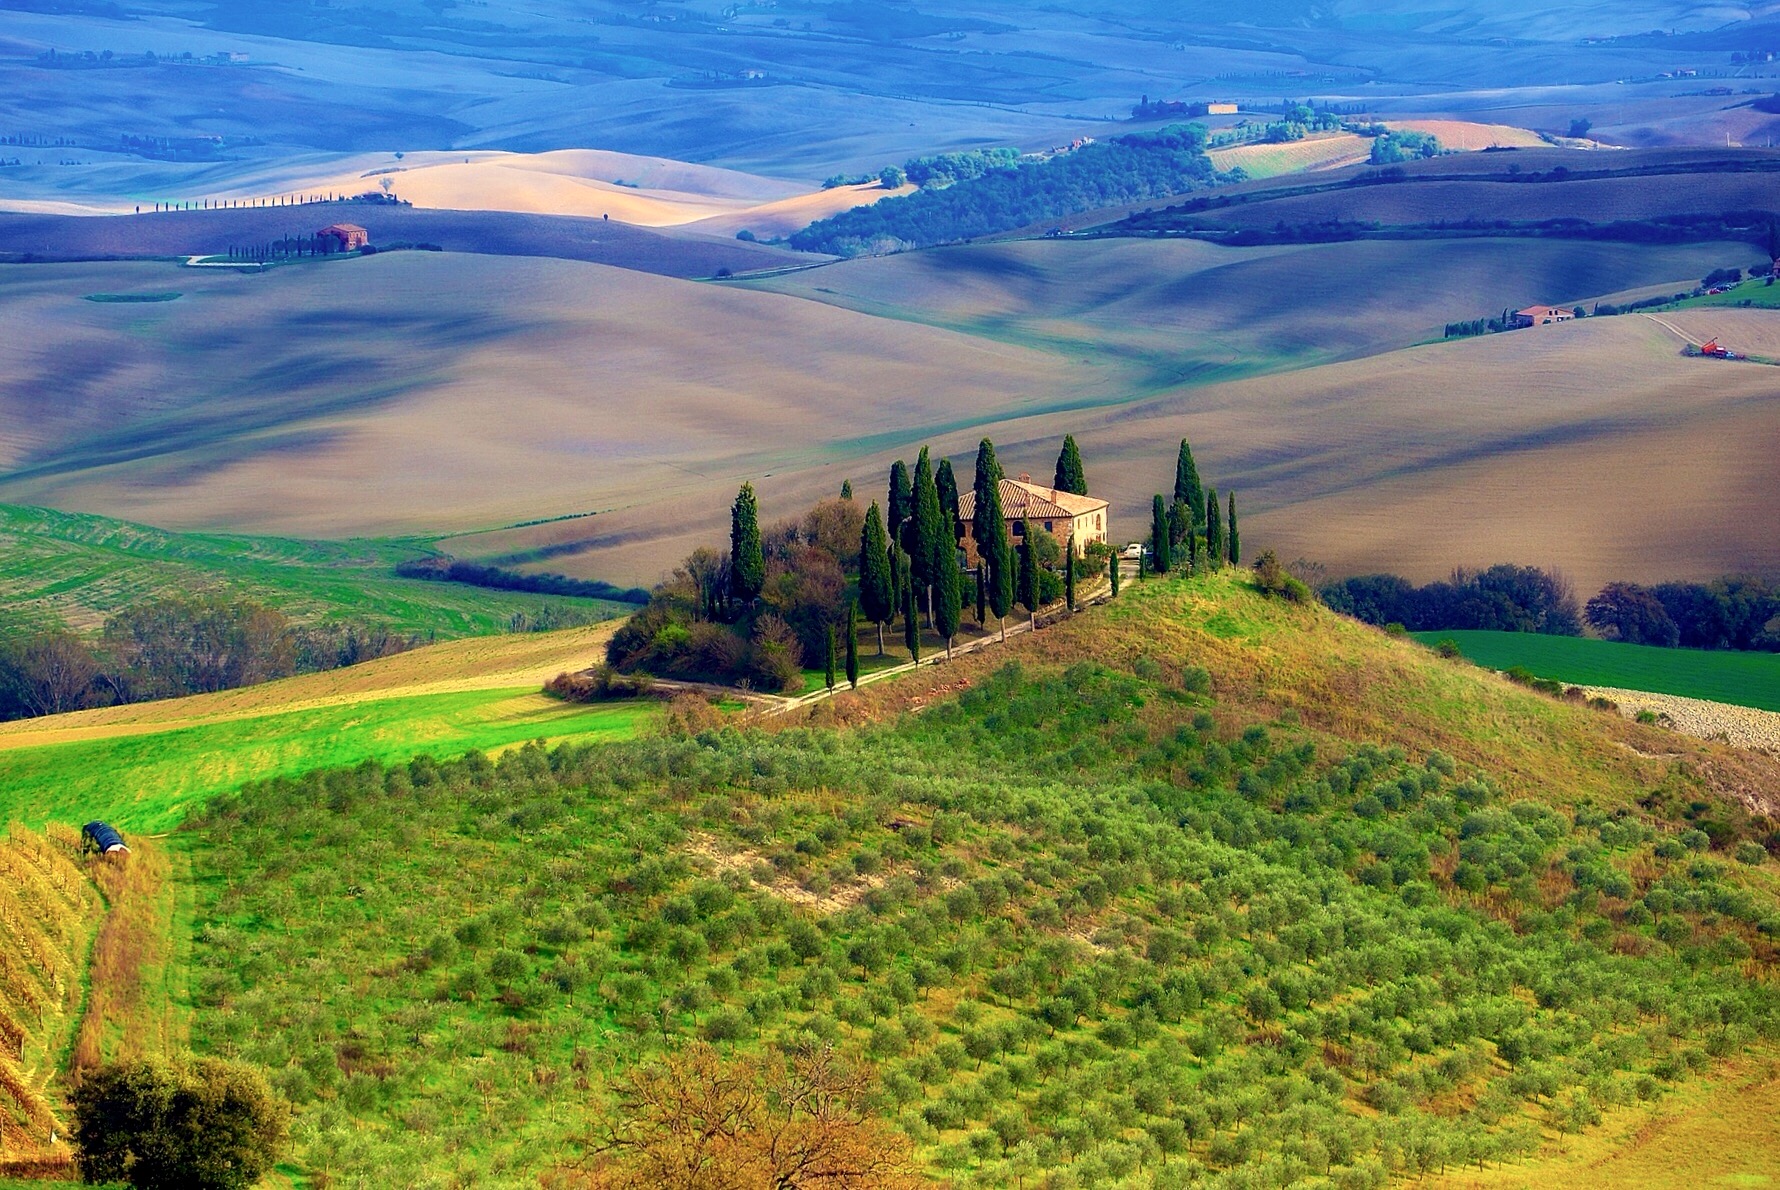 Set of the film "The Gladiator" in San Quirico d'orcia "...